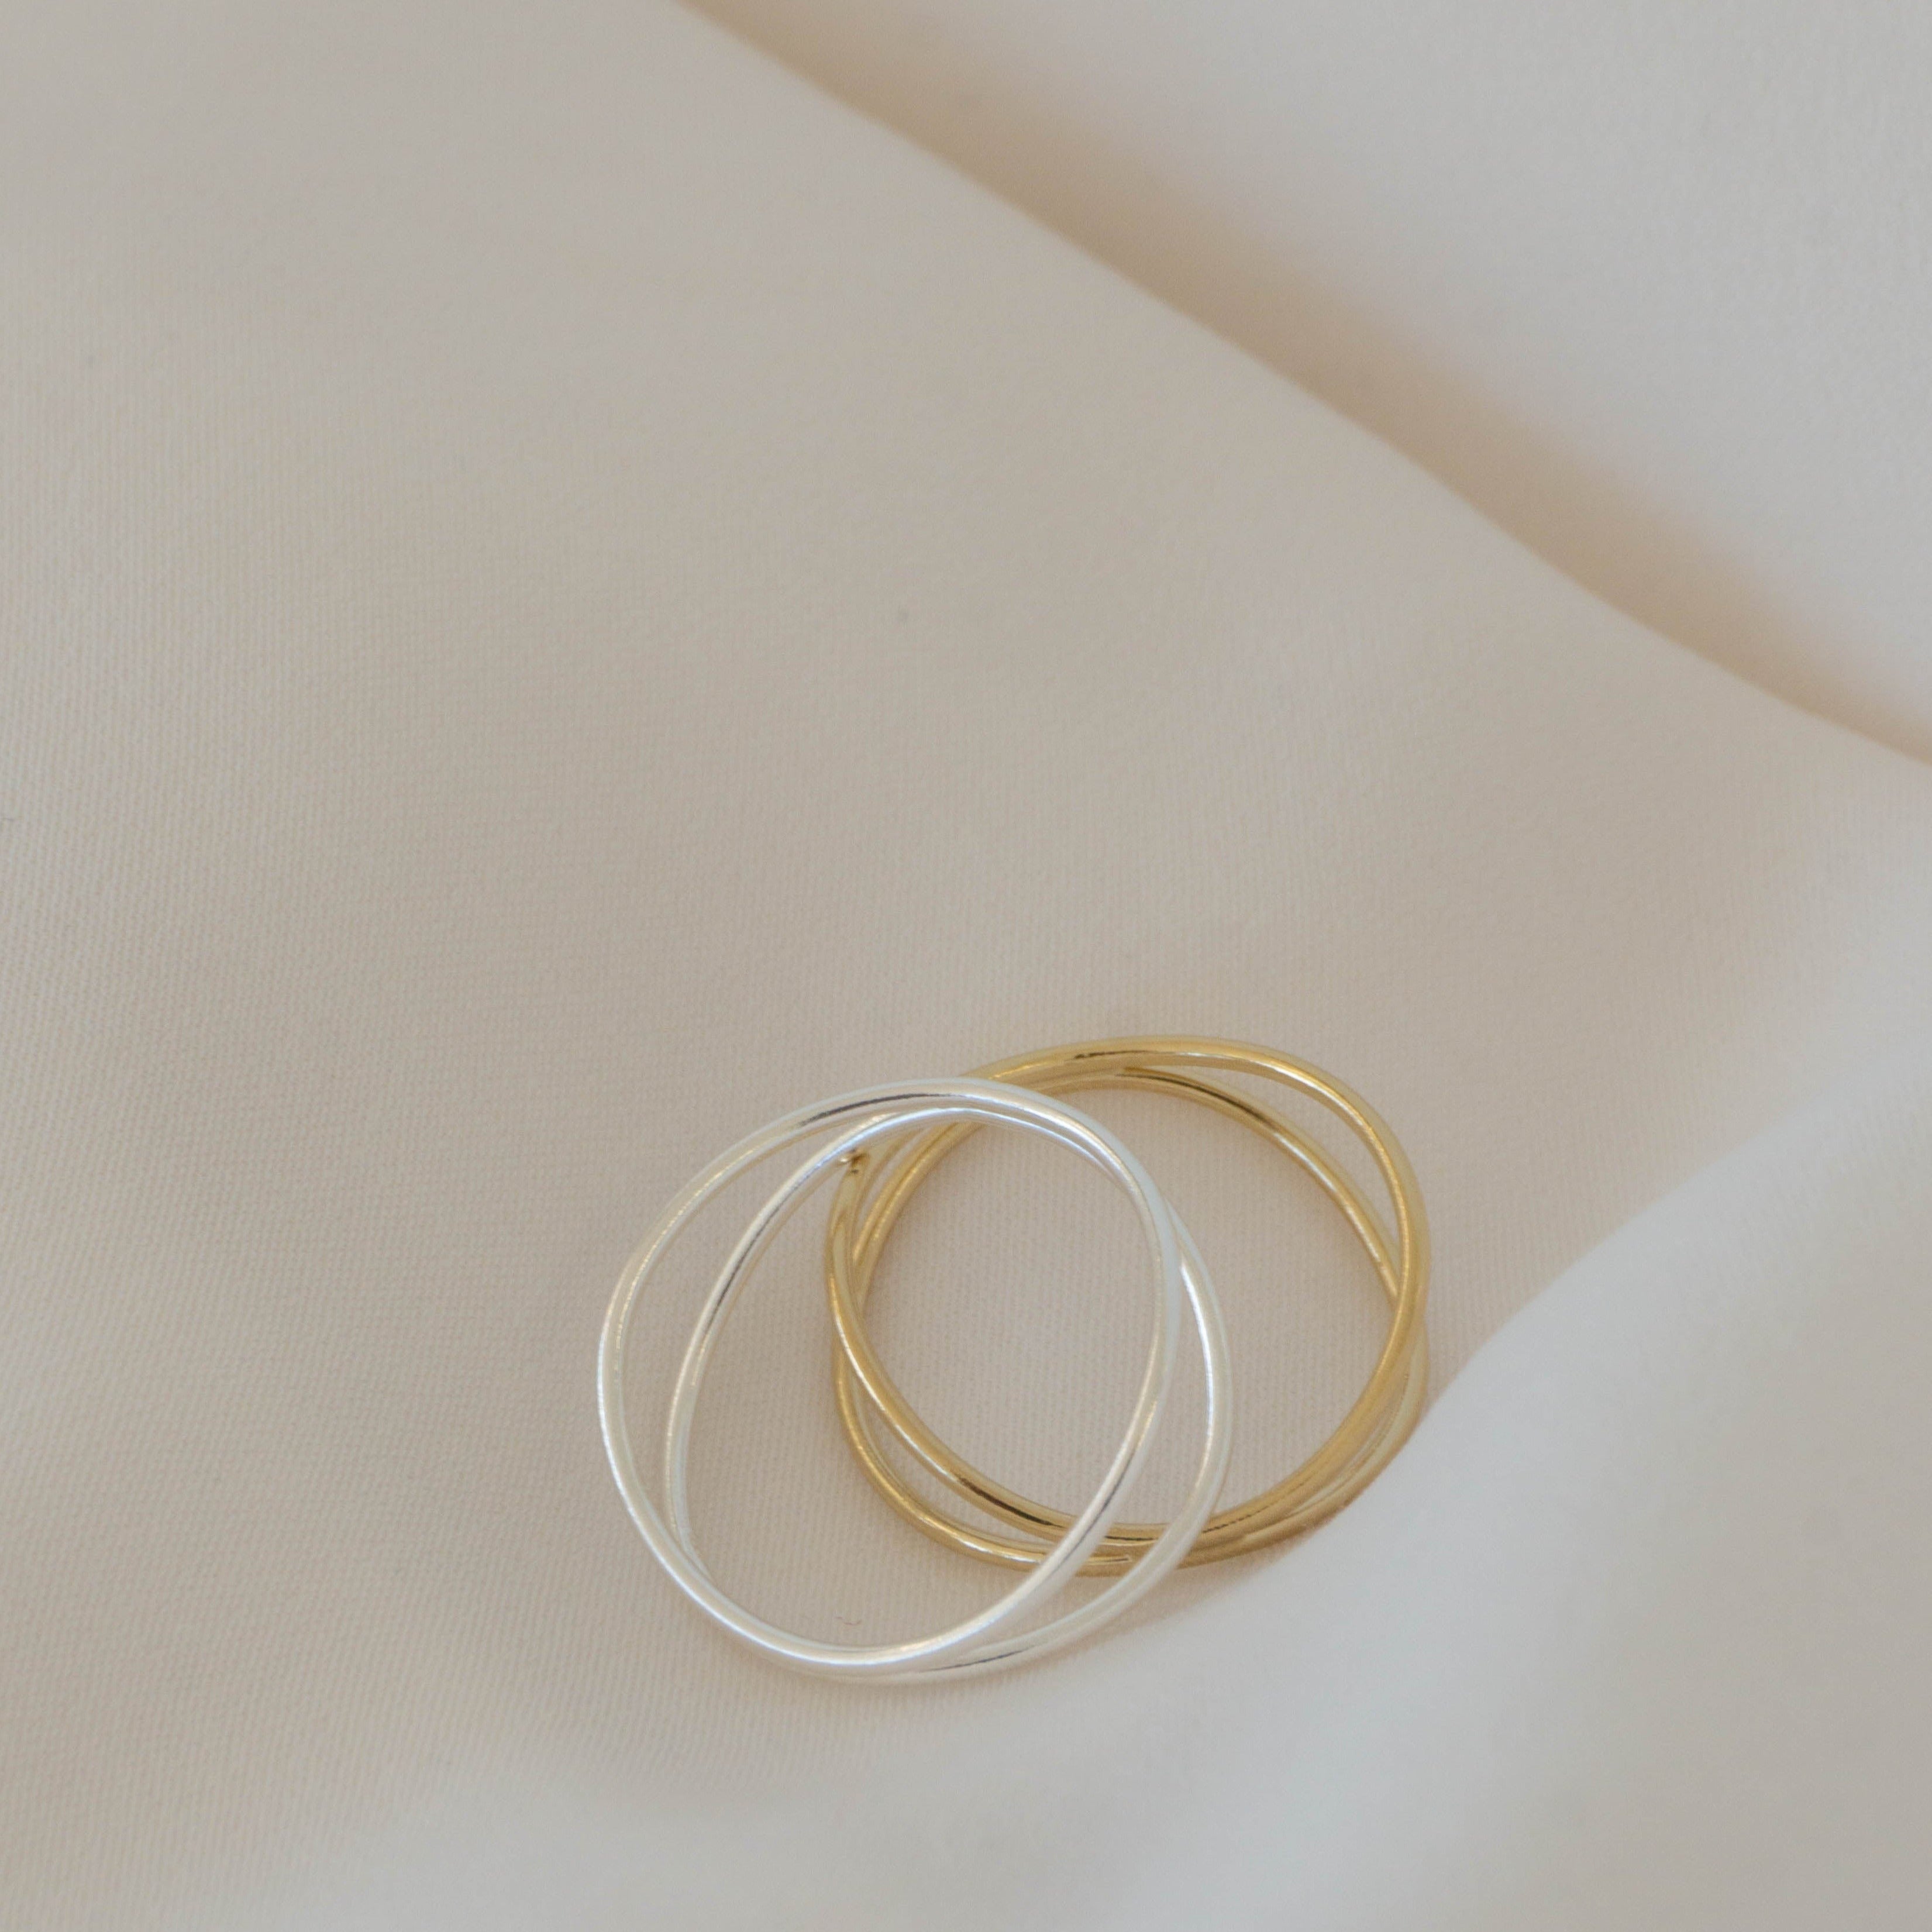 double wave ring / gold filled stacking ring / sterling silver stacking ring